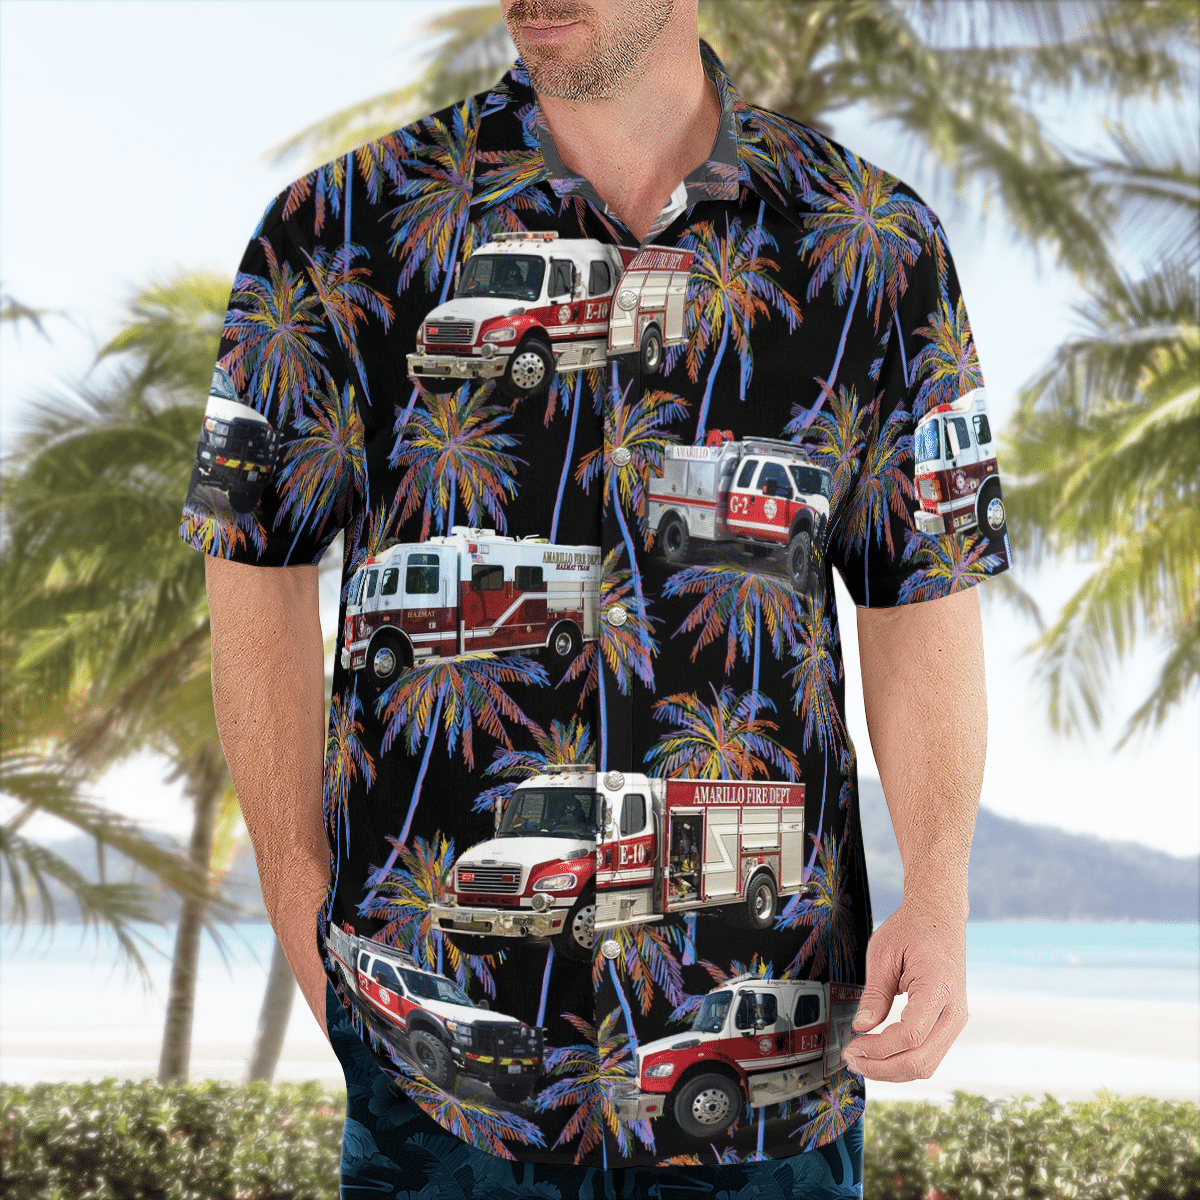 There are several styles of beach and Hawaiian shorts and tops to choose from 45